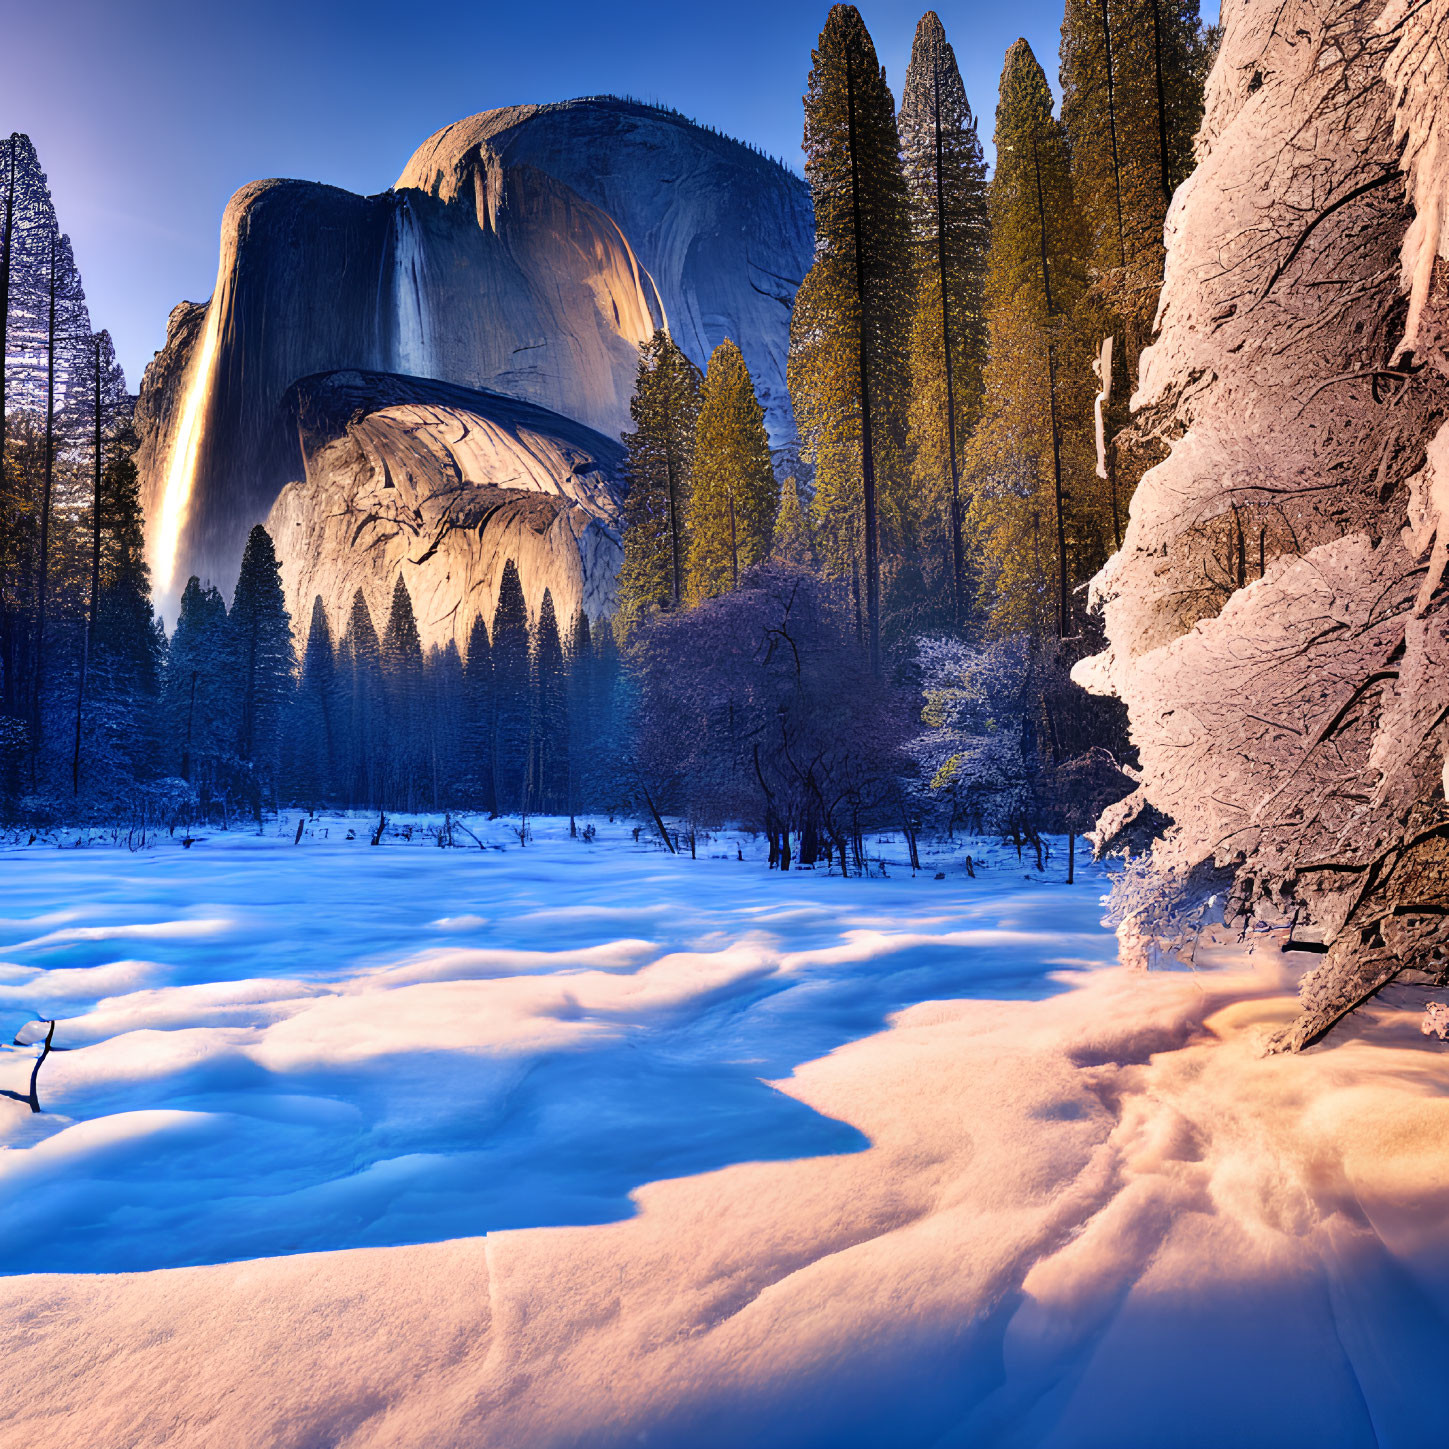 Vibrant sunset colors over snowy Yosemite landscape with Half Dome and frosted trees